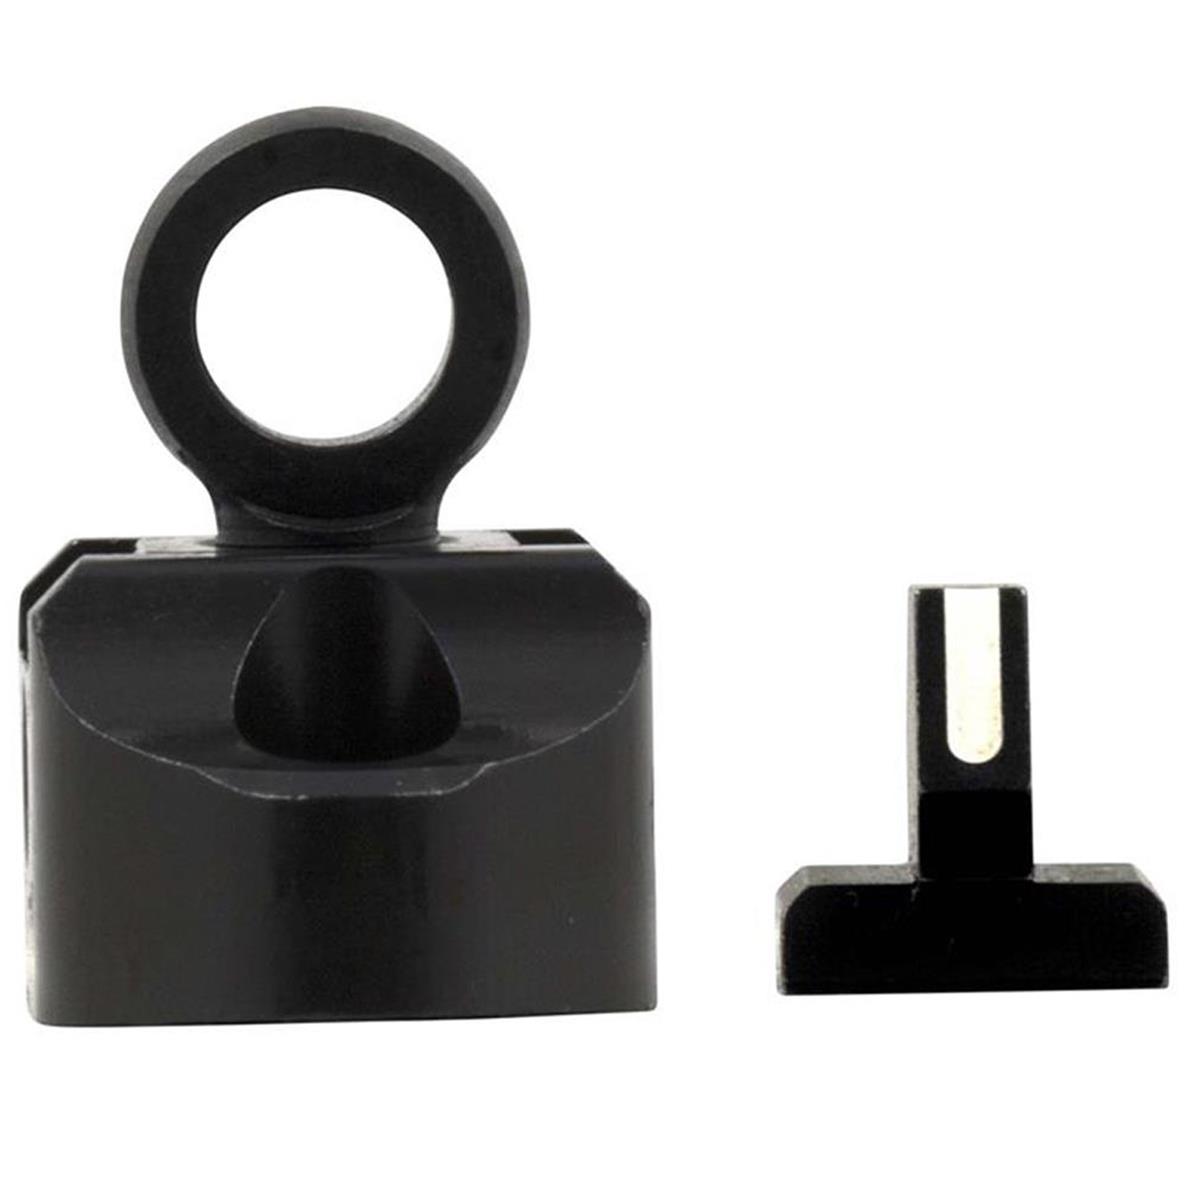 Image of XS Sights Ghost-Ring Aperture Set with .340 Ramp for Remington 700 Rifle